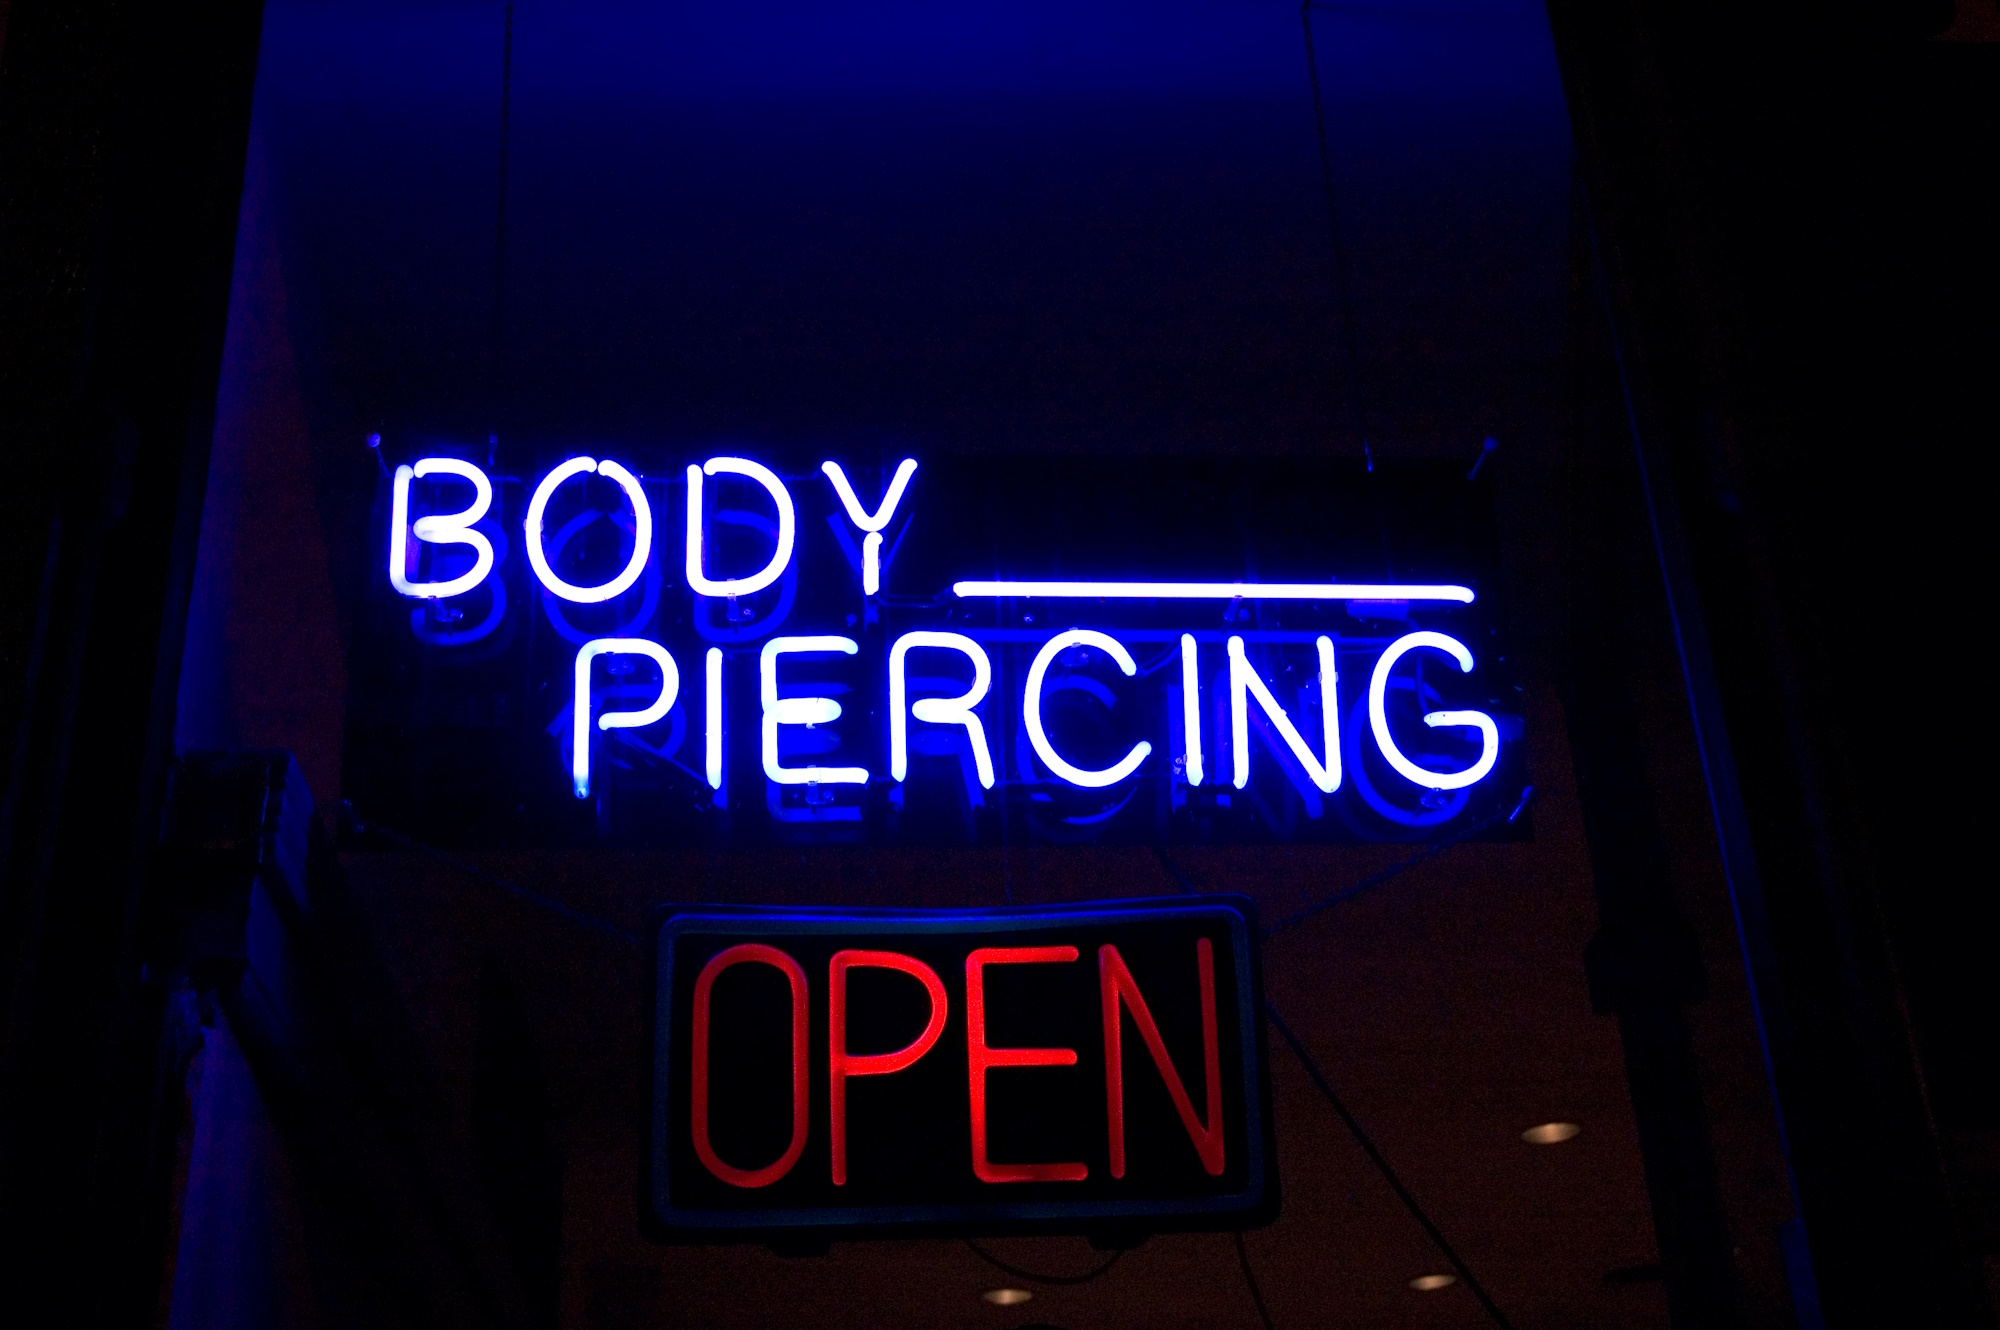 A body piercing studio neon sign that has BODY PIERCING in blue neon and OPEN in red neon.